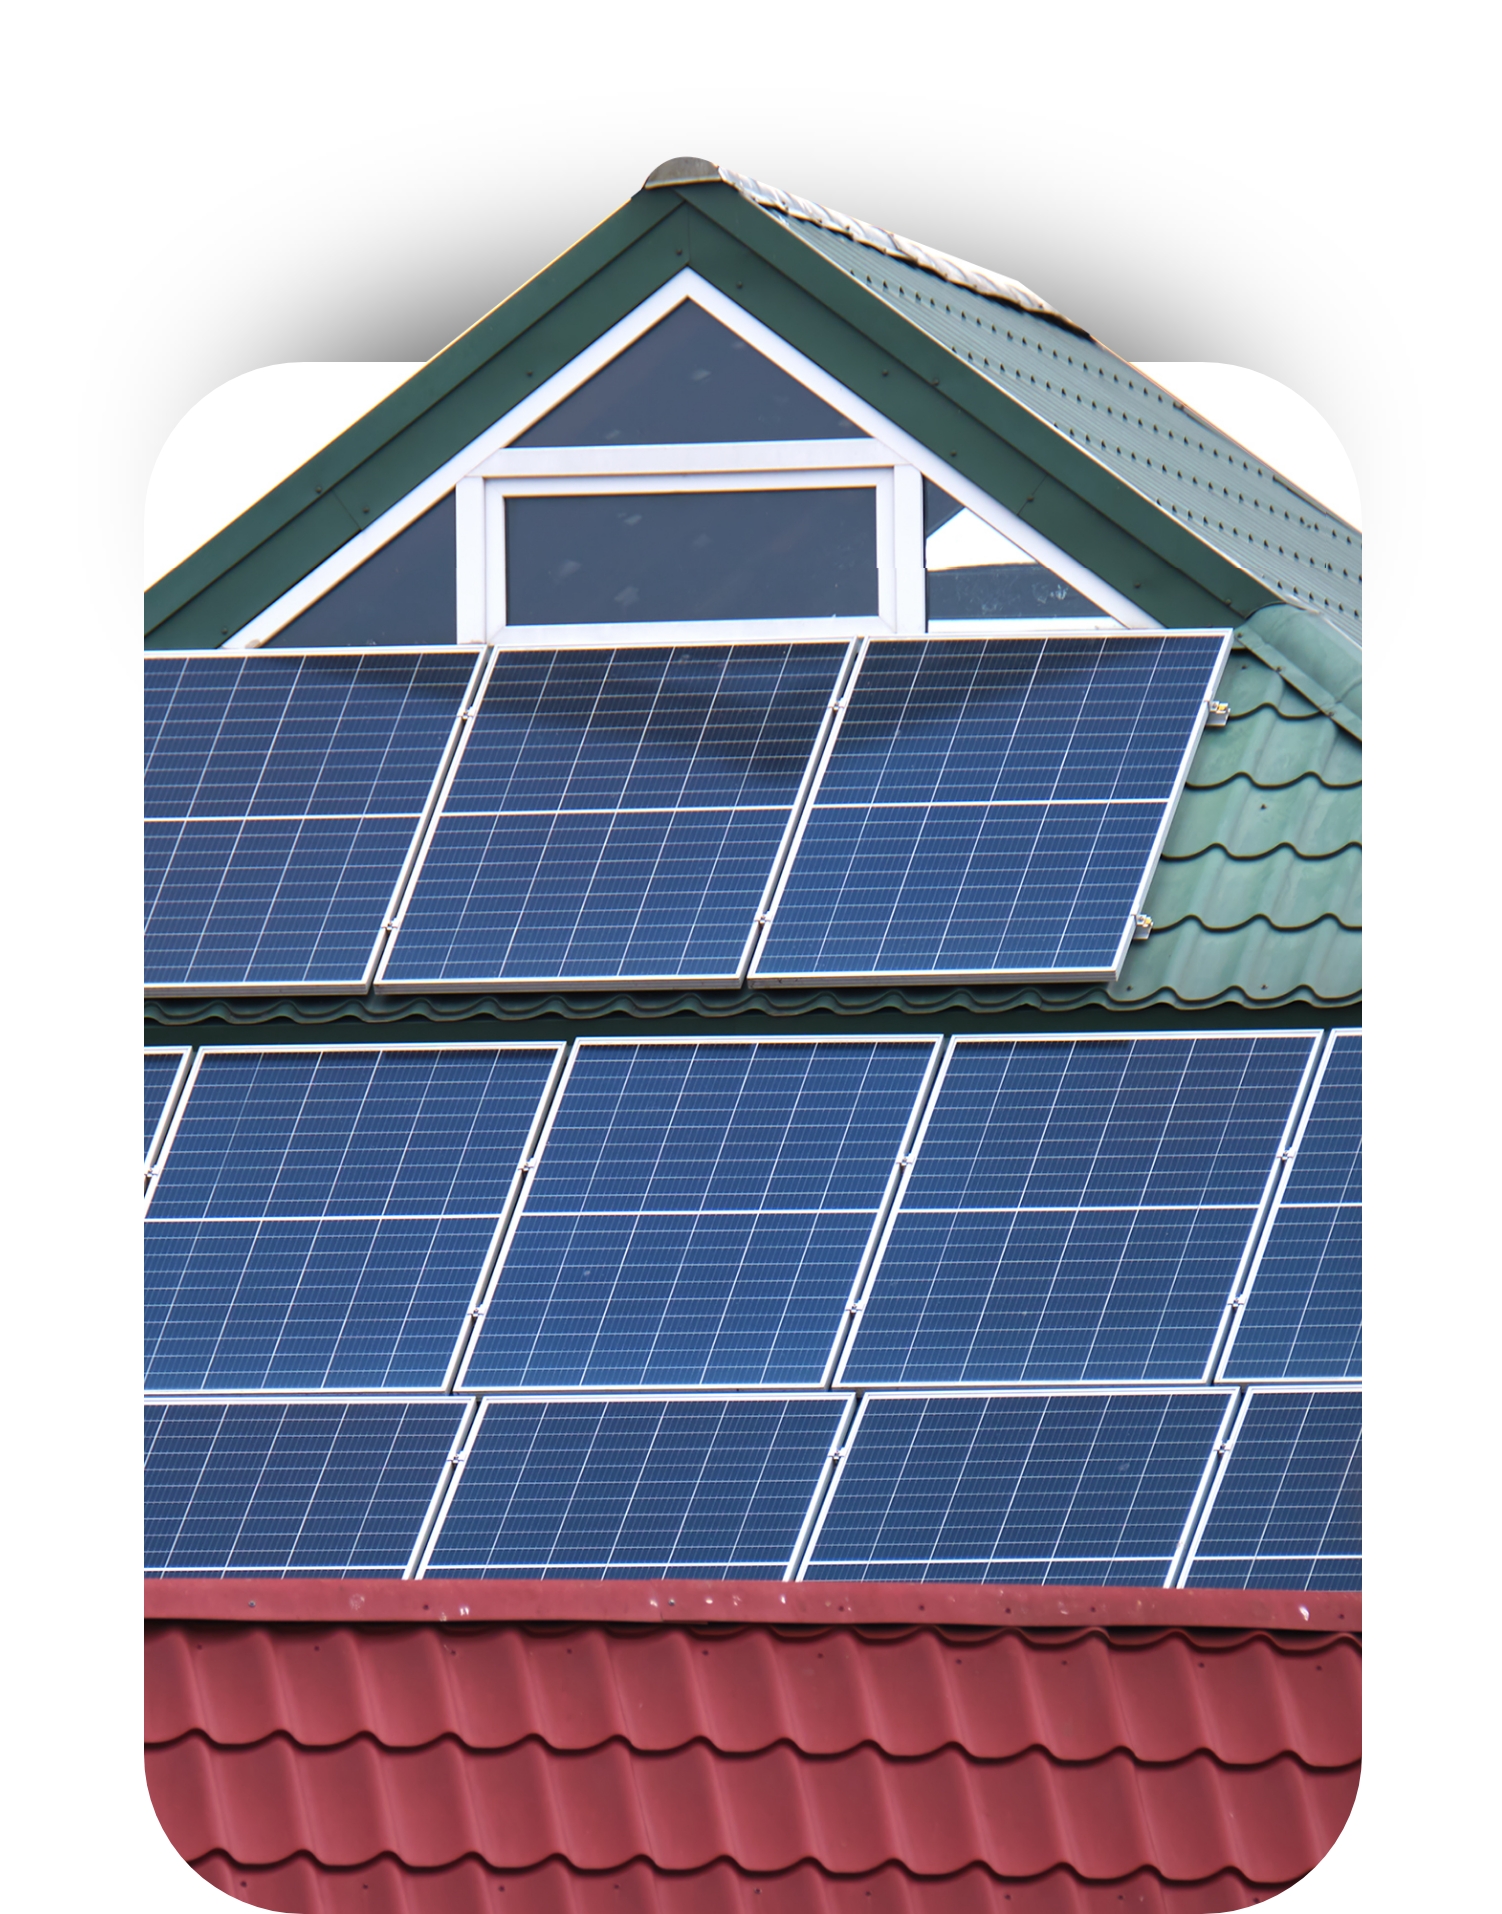 Solar by Peak to Peak are the top solar panel installers of the best solar companies in Denver, CO, for rooftop solar panels, community solar gardens, home solar systems, and home solar panel installation.